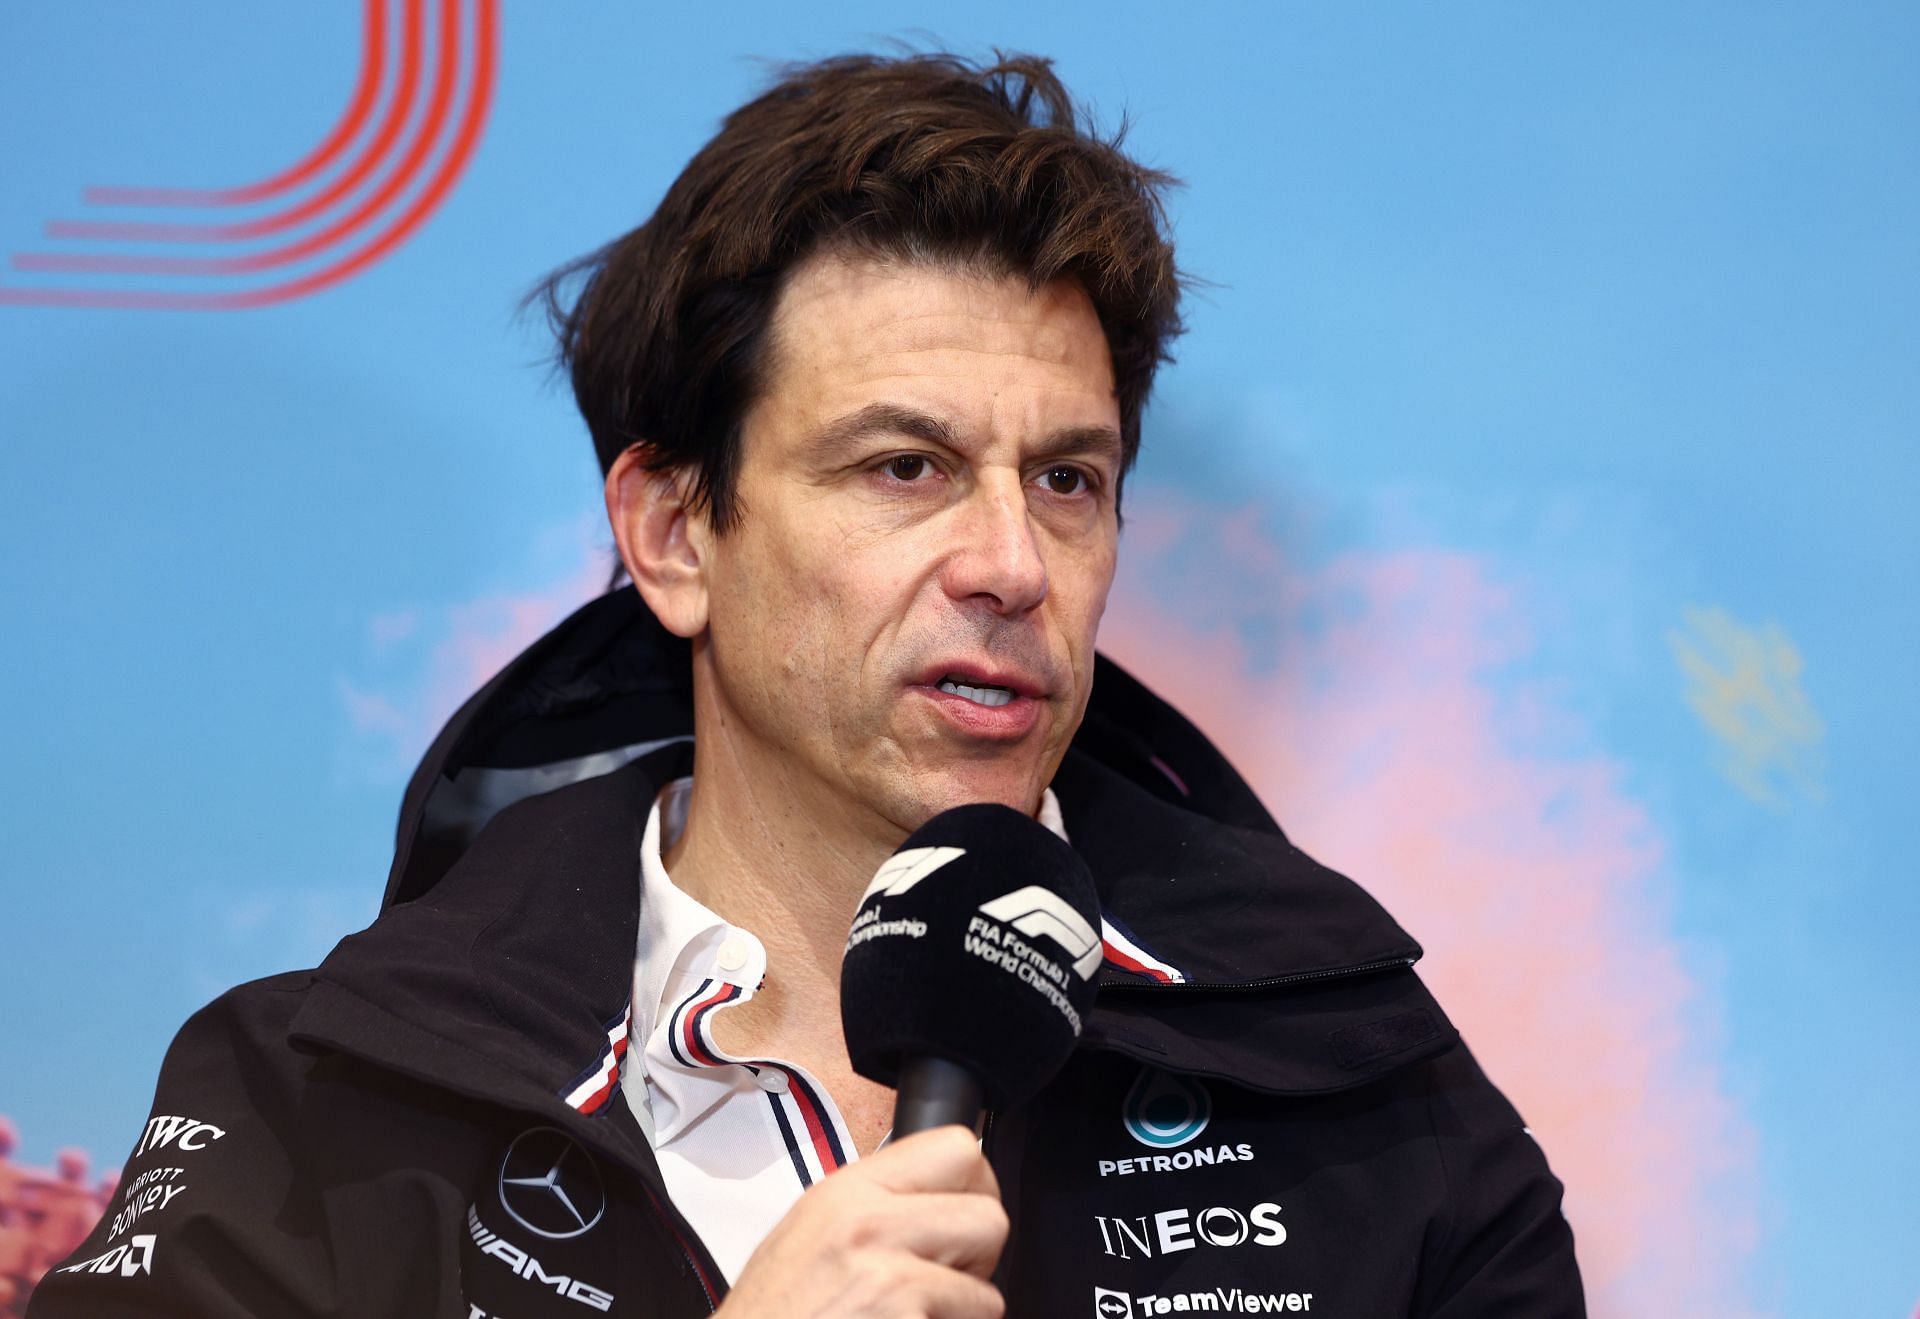 Mercedes team principal Toto Wolff speaks to the media during the 2022 F1 Austrian GP weekend. (Photo by Clive Rose/Getty Images)